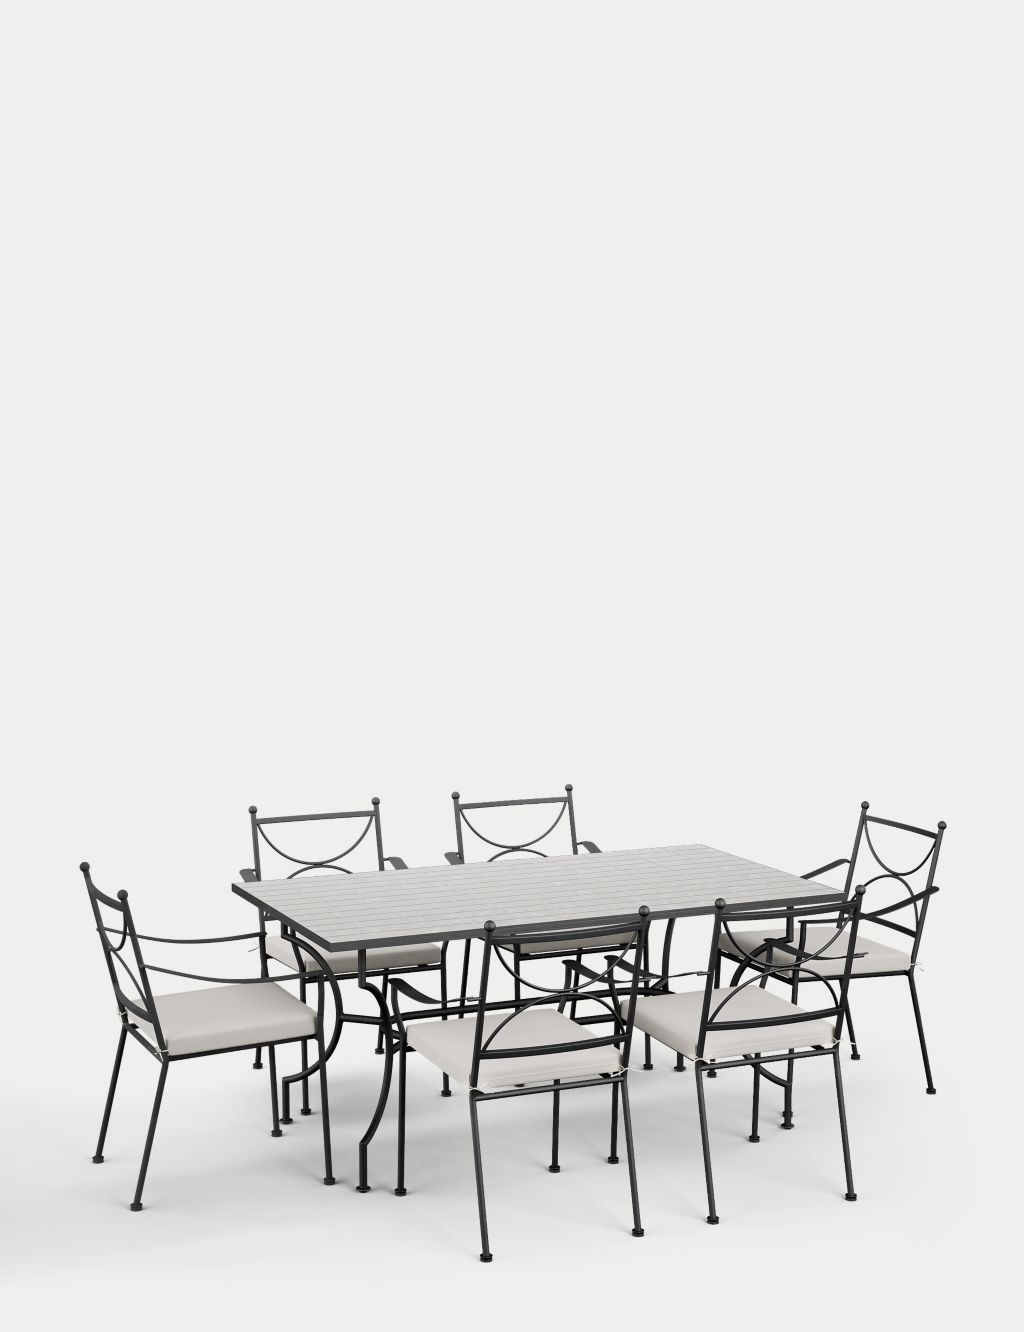 Pembroke 6 Seater Garden Dining Table & Chairs